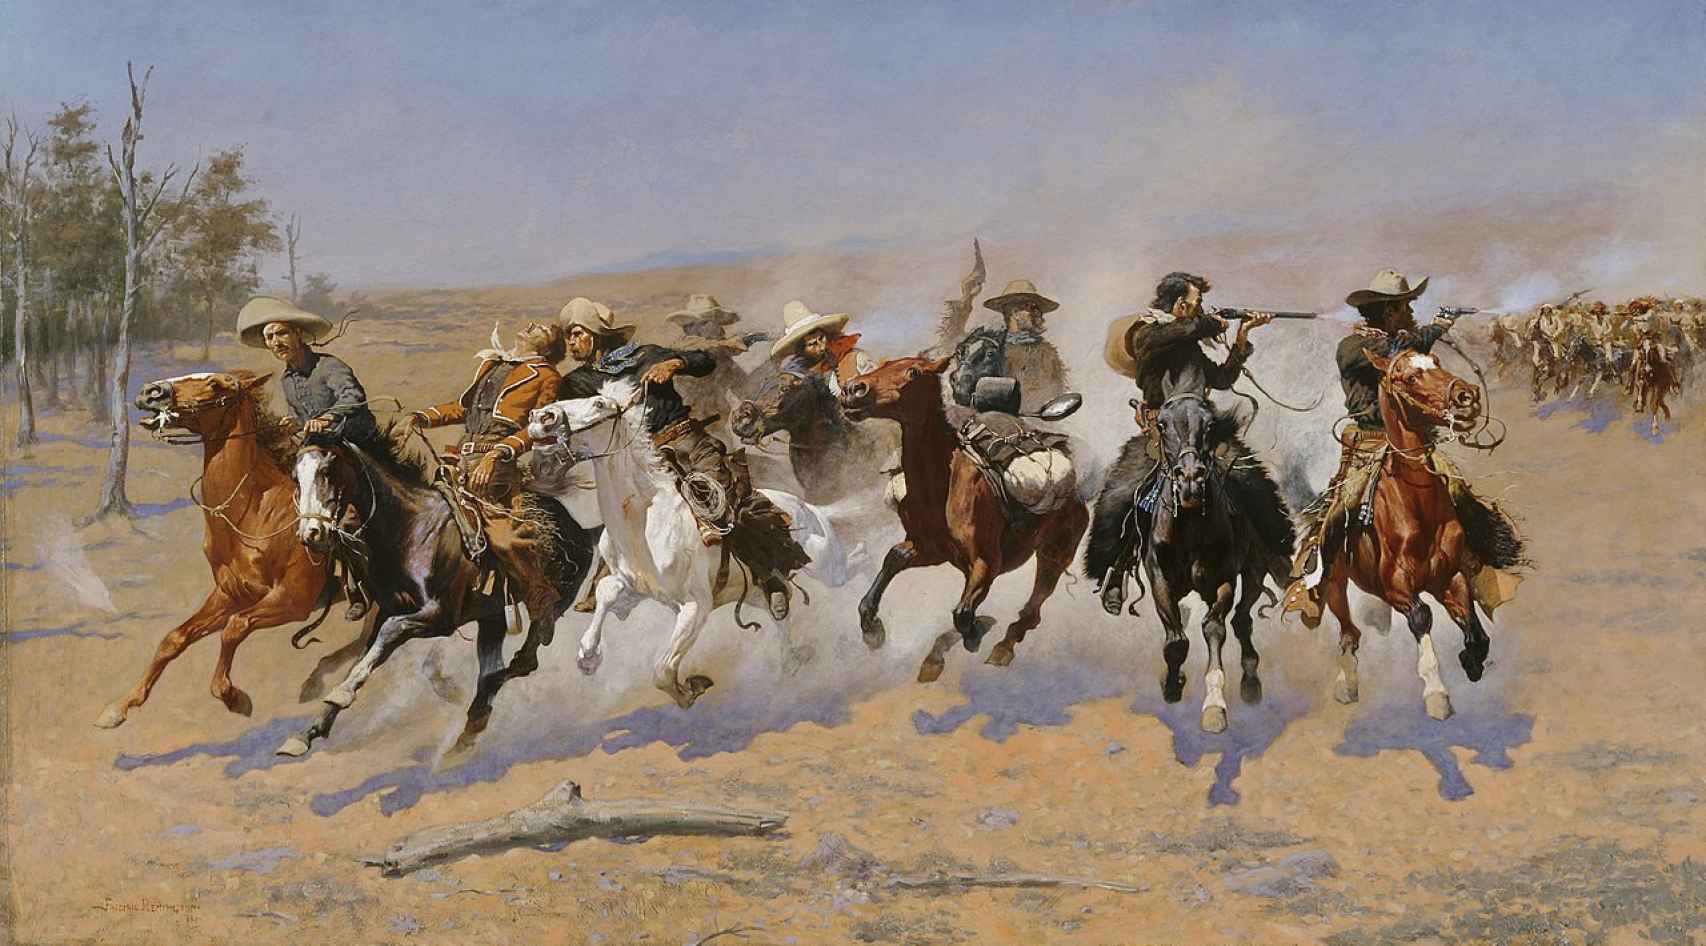 Frederic S. Remington: 'A Dash for the Timber' (1889).